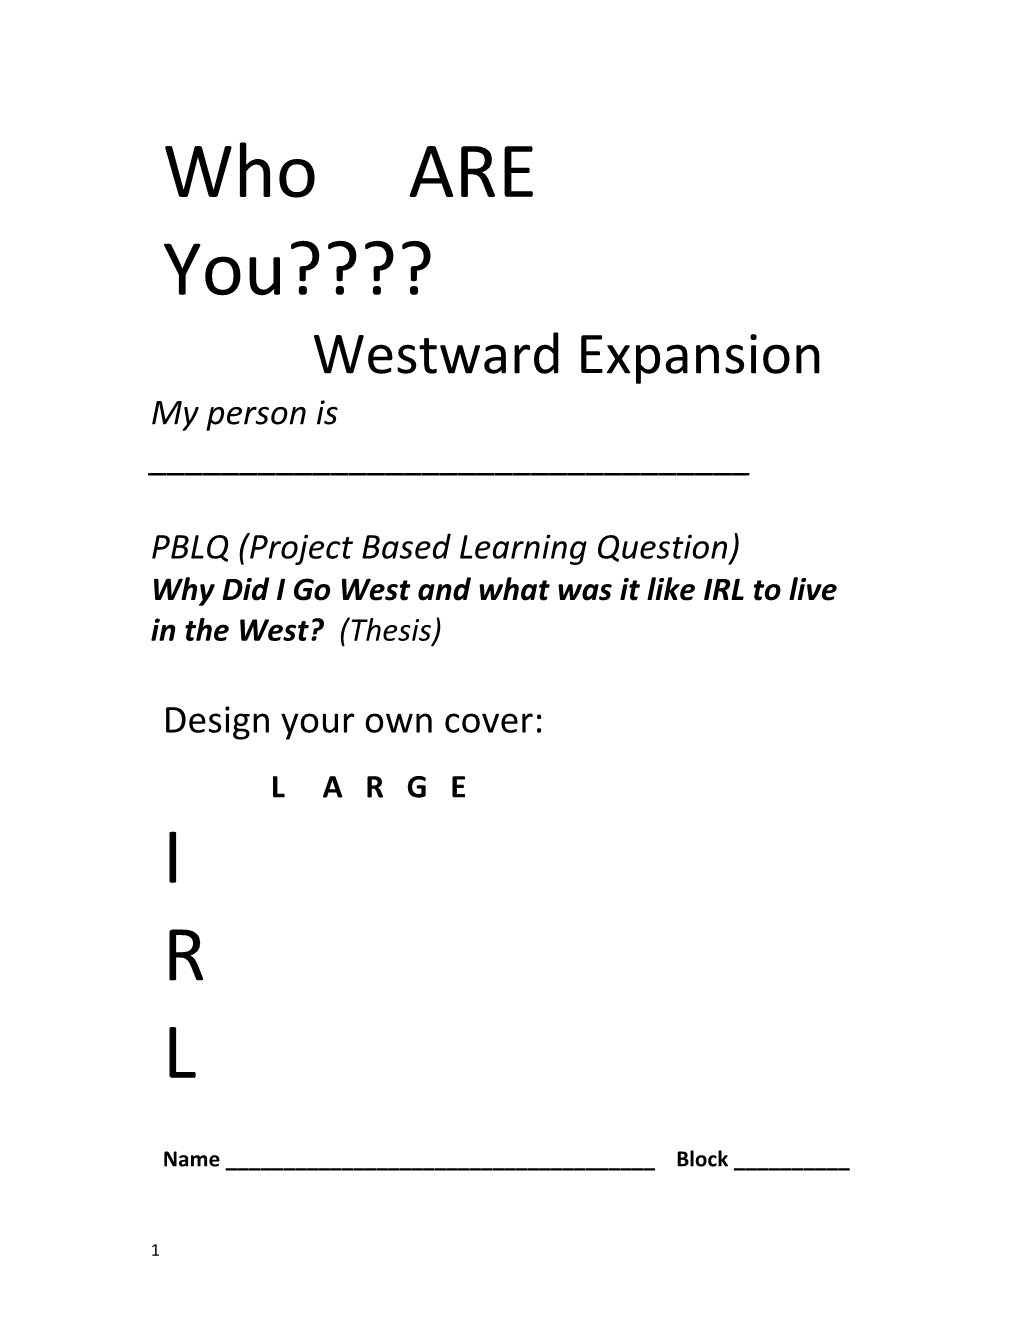 PBLQ (Project Based Learning Question)